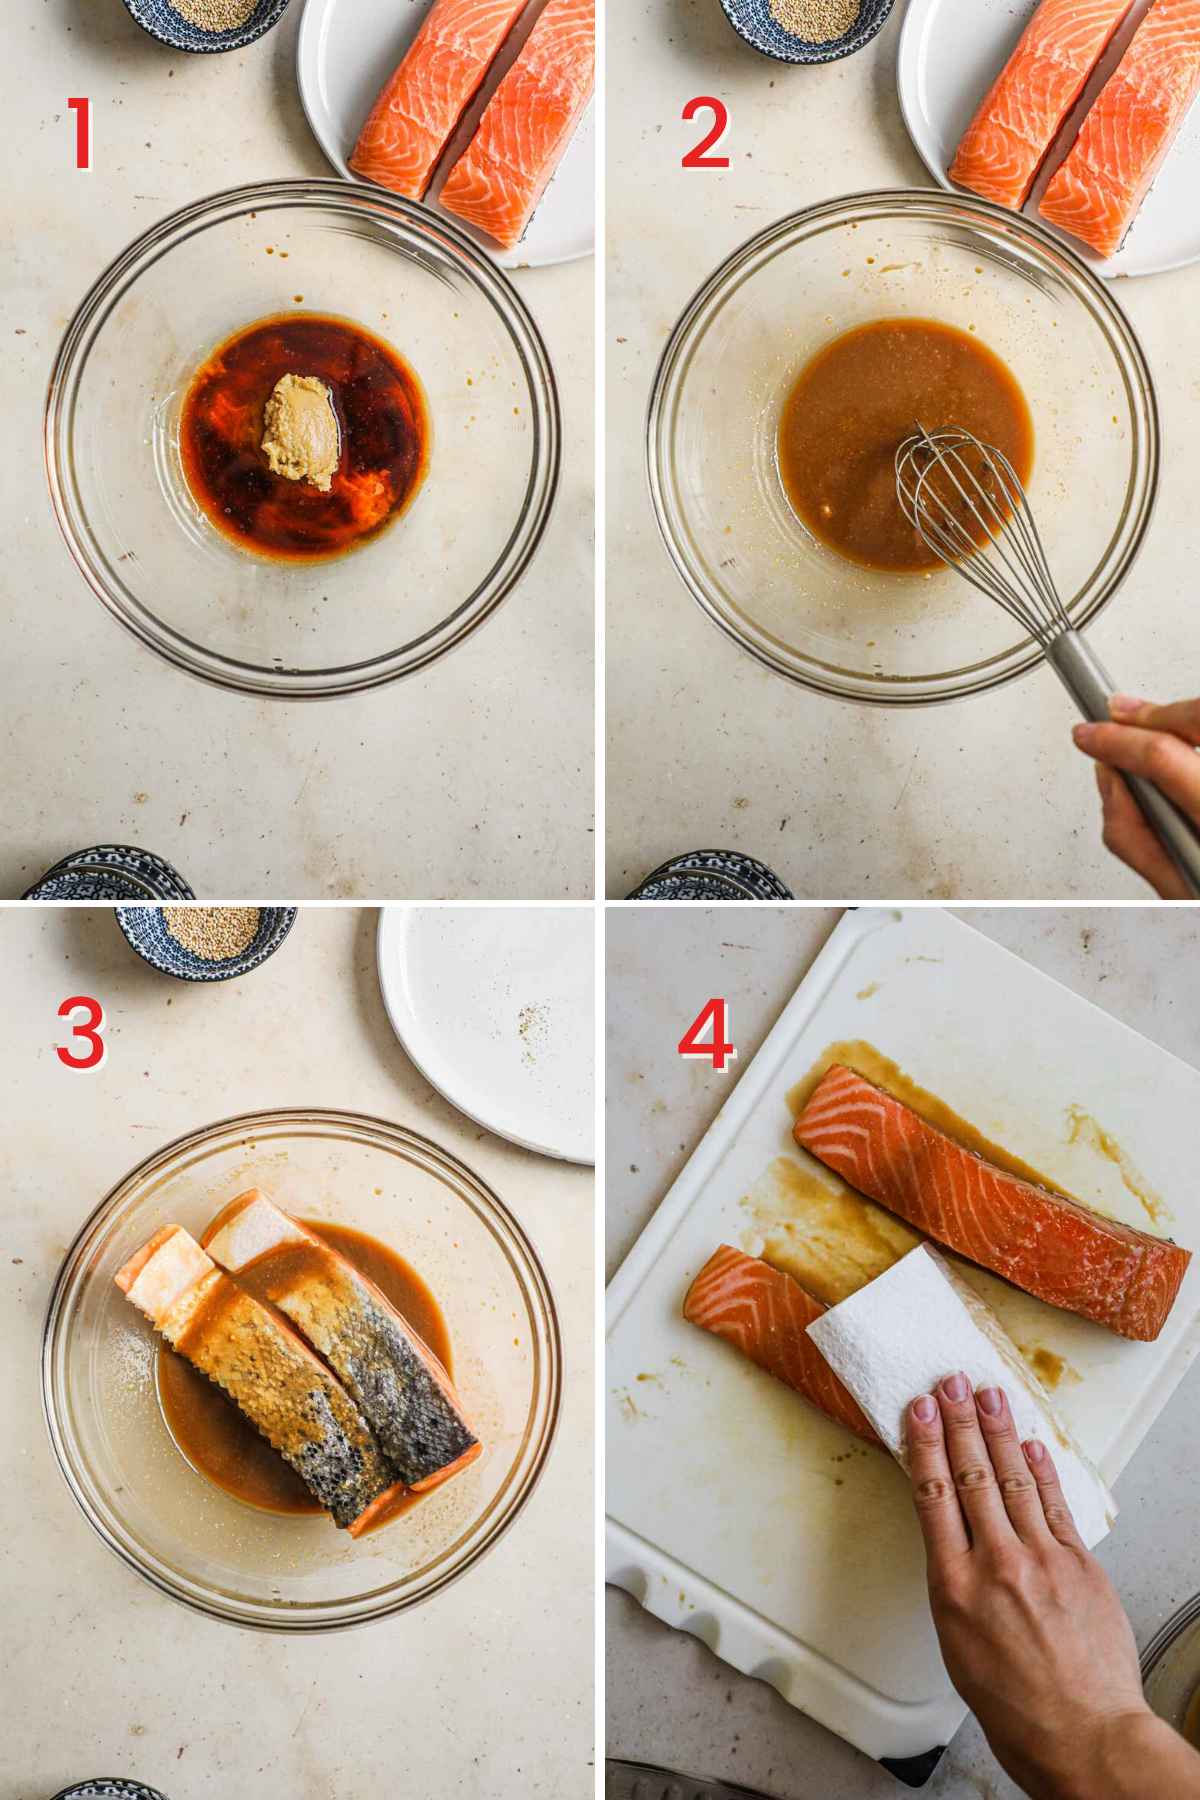 Steps to make miso honey salmon bites, whisk miso, soy sauce, rice vinegar, honey; marinate salmon; dry off salmon with paper towel.